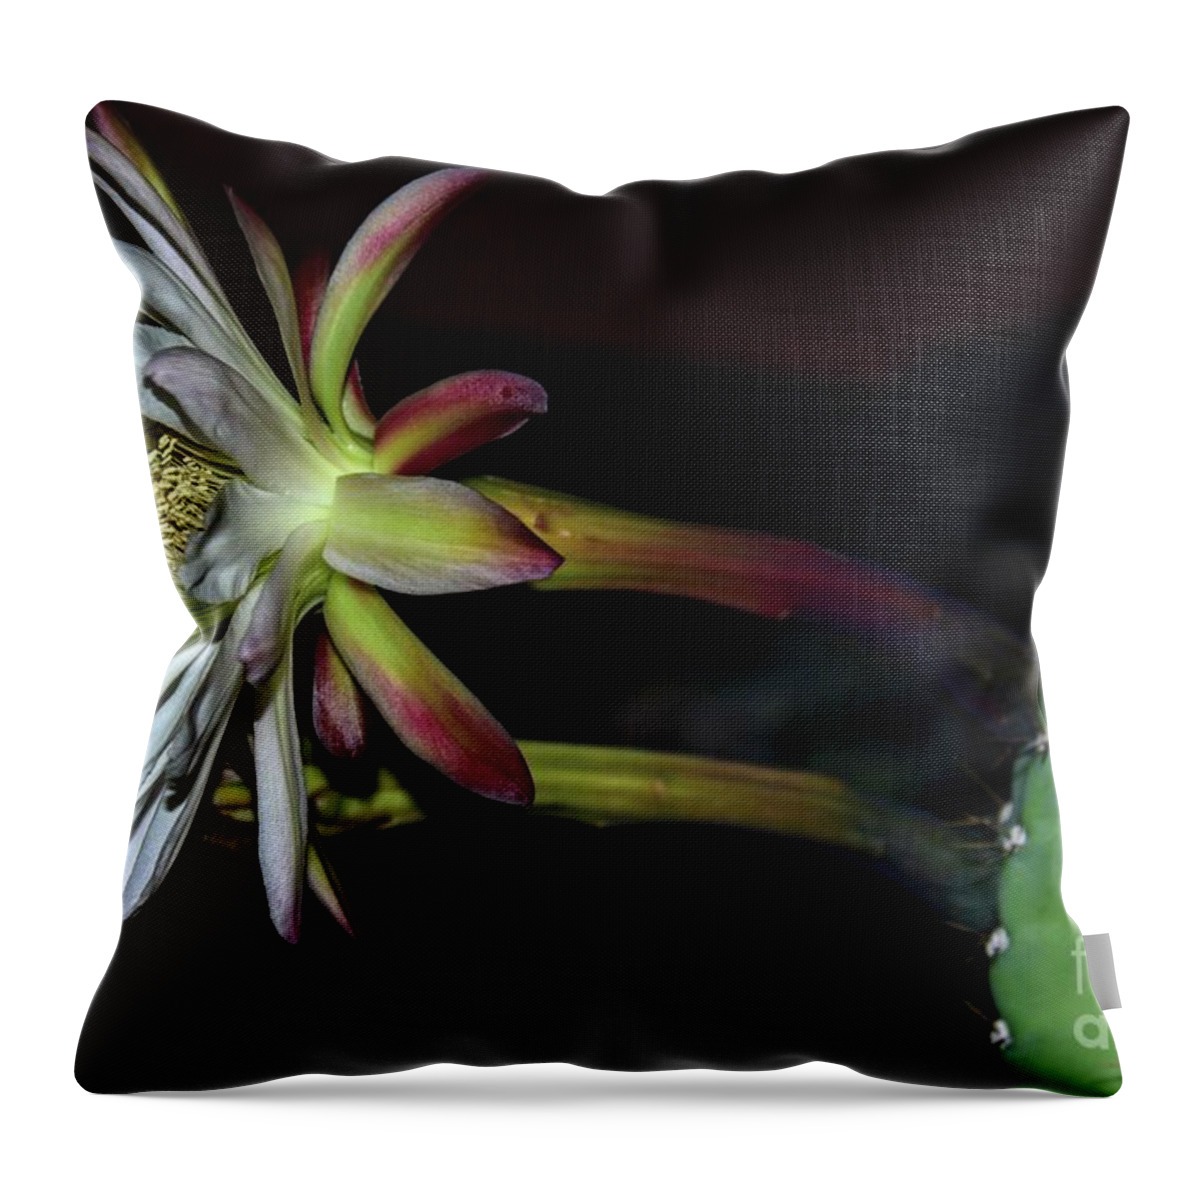 Cereus Repandus Throw Pillow featuring the photograph Night Flower by Angela J Wright